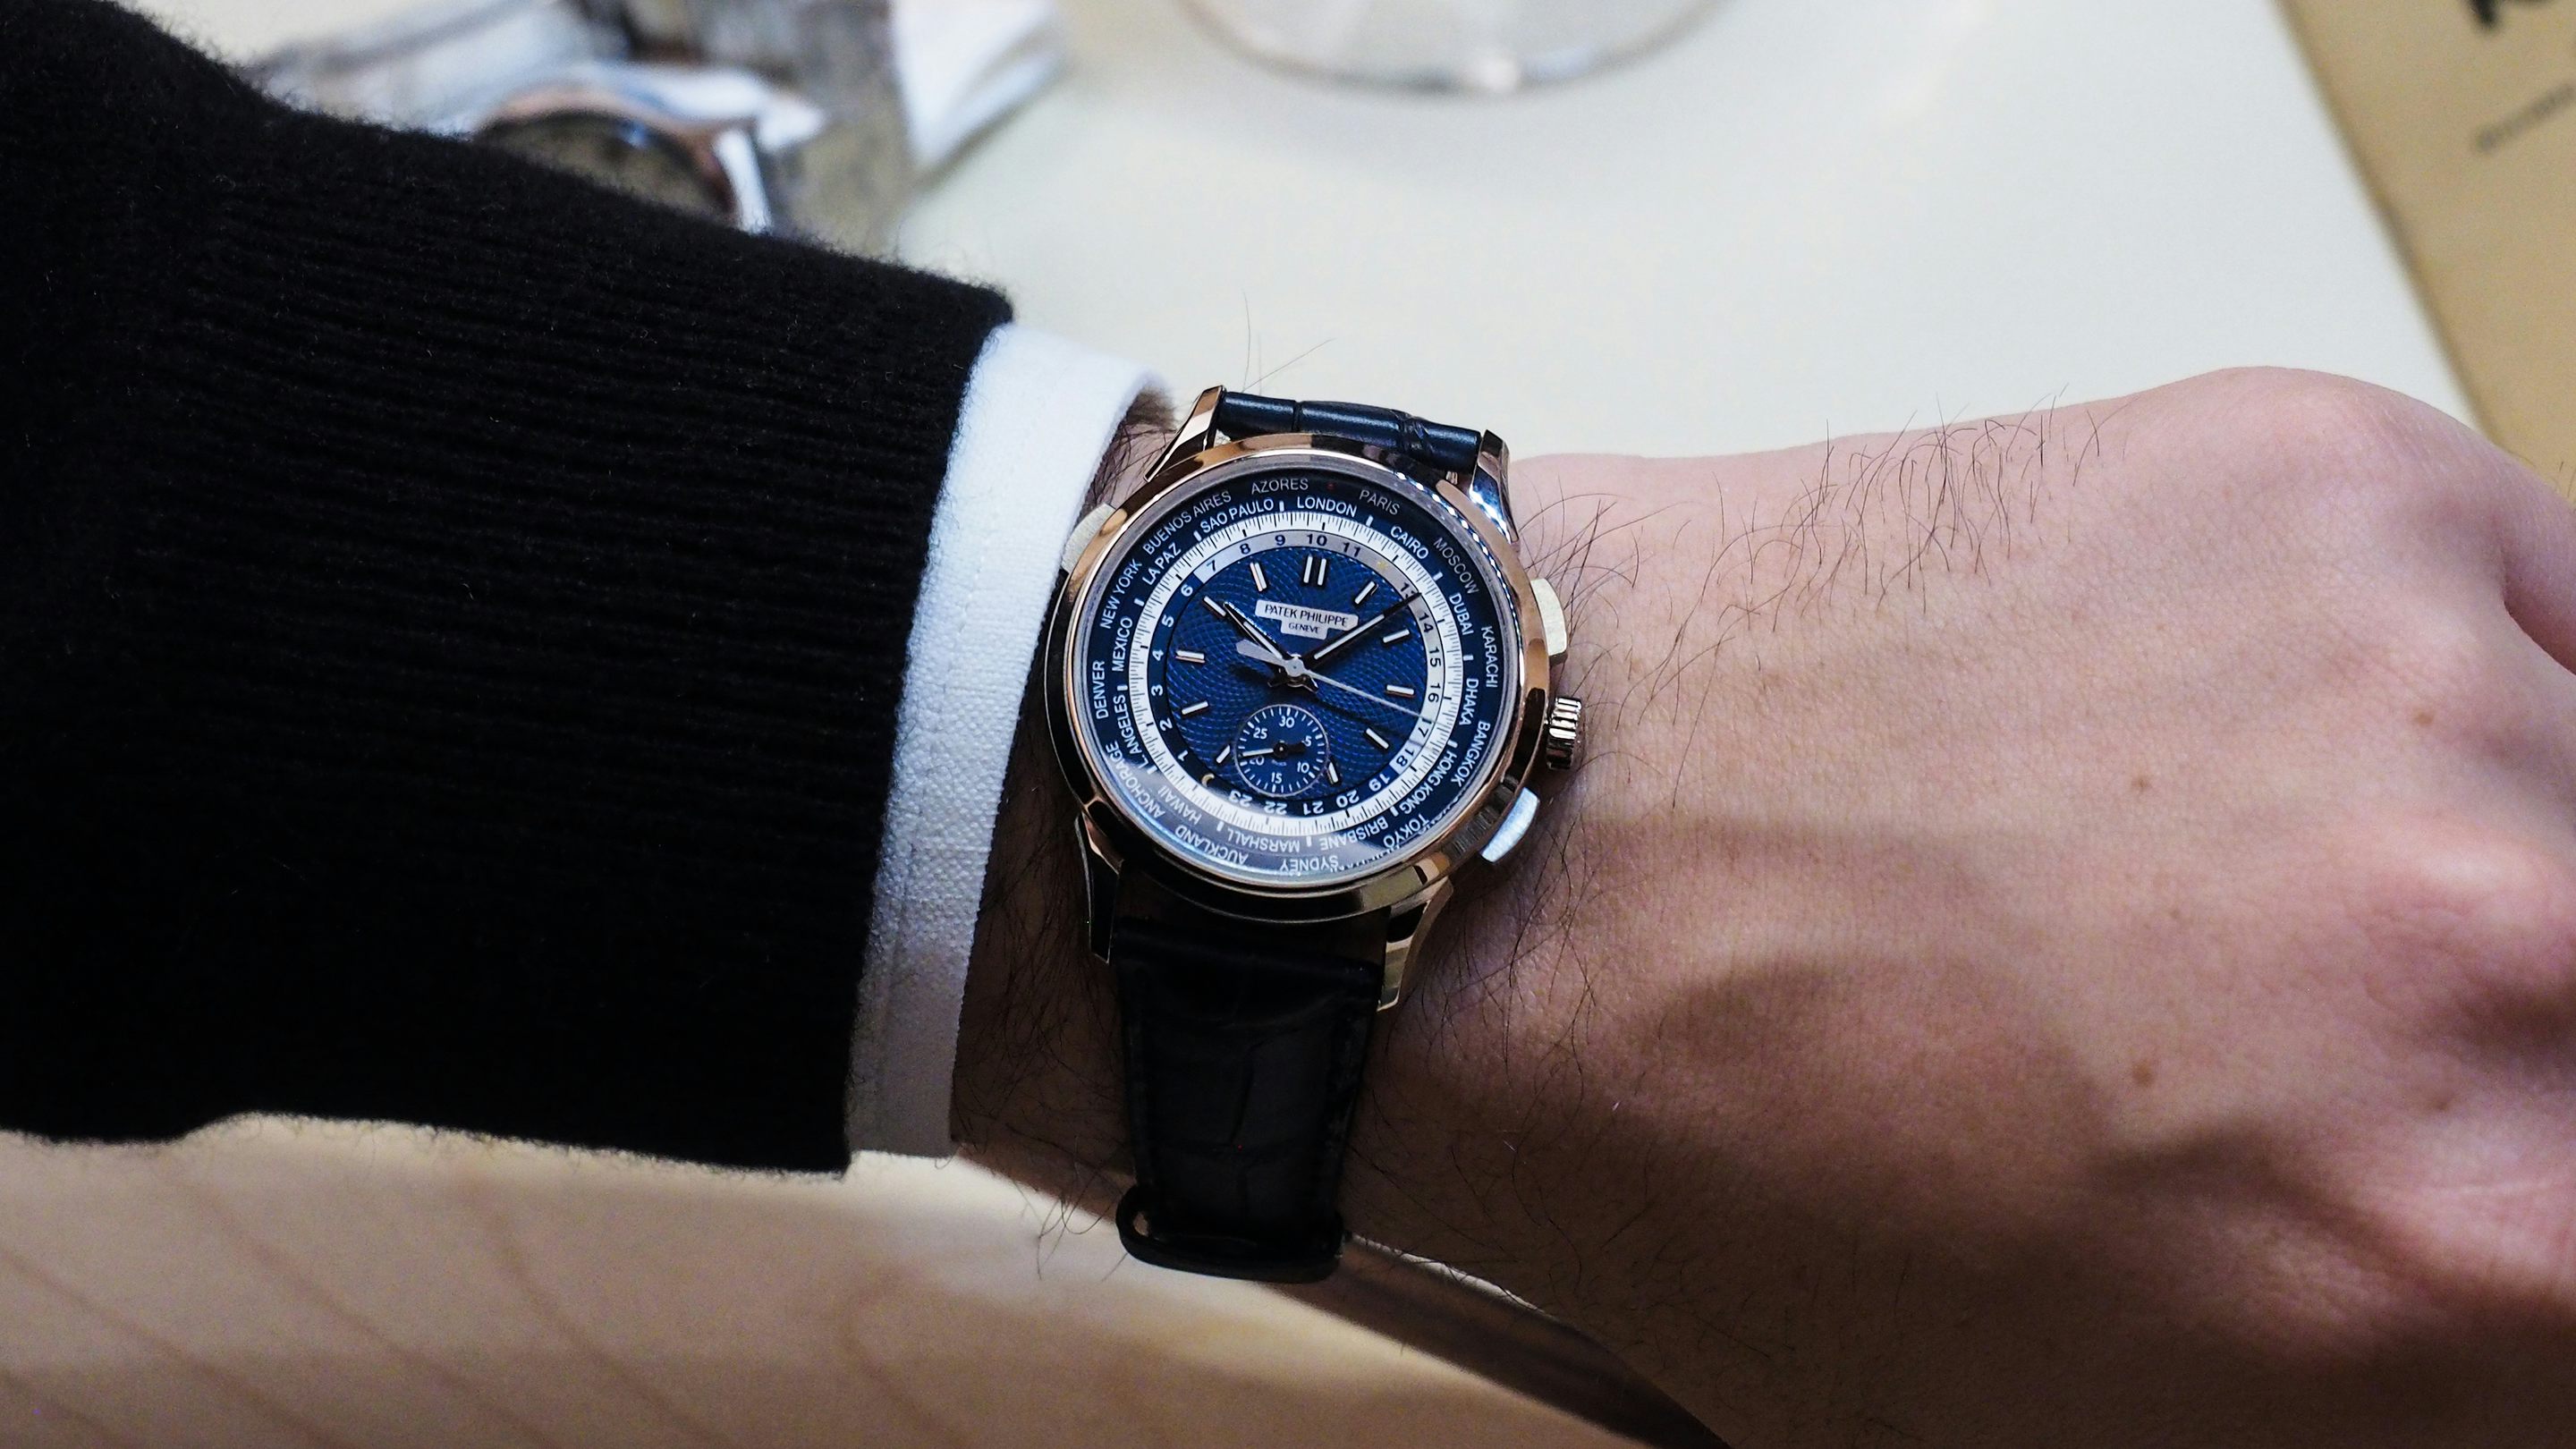 Chopard LUC Chrono One Flyback - WATCH REVIEW BY ESCAPEMENT